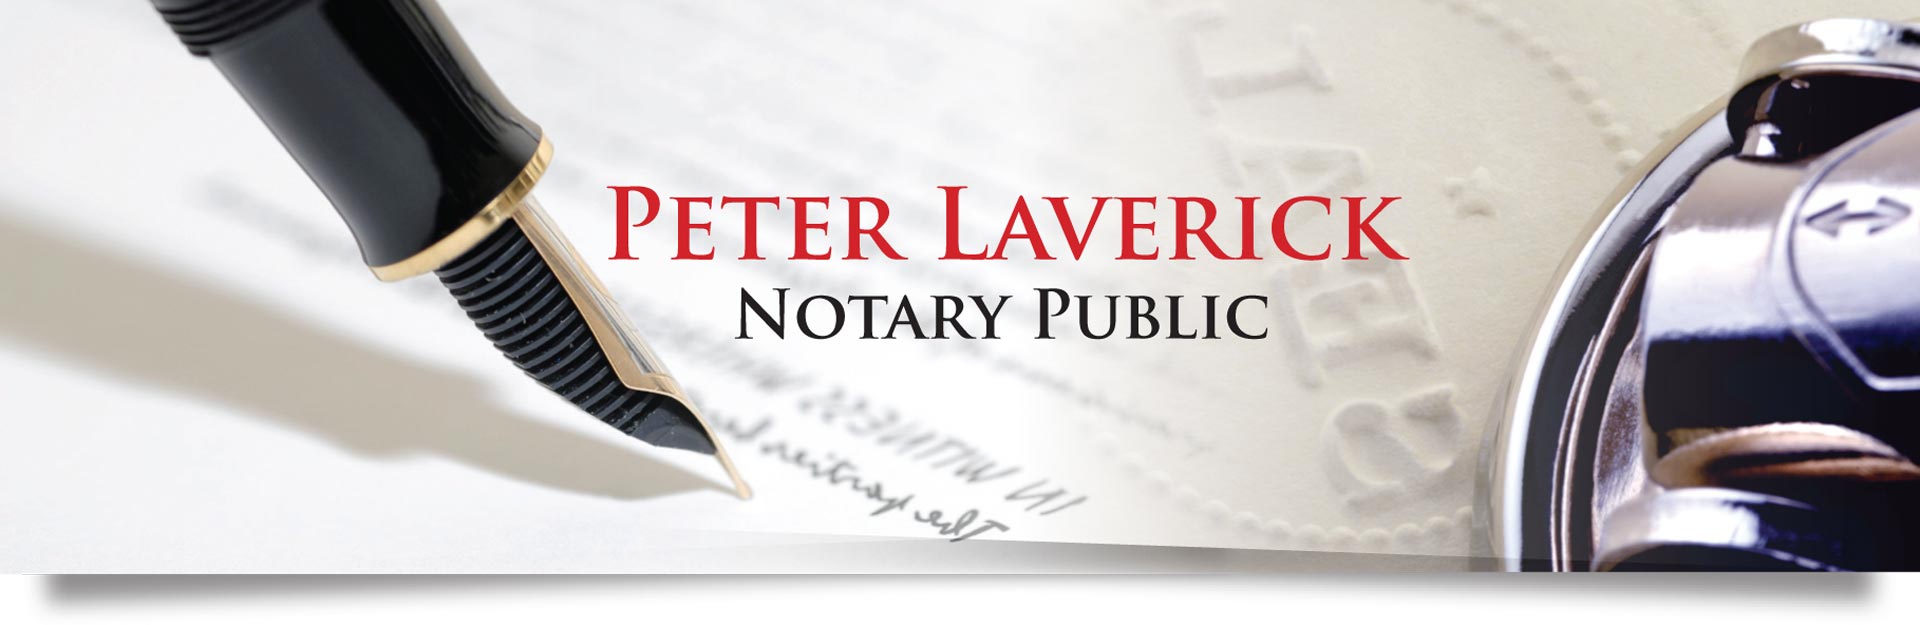 notary public Chichester West Sussex